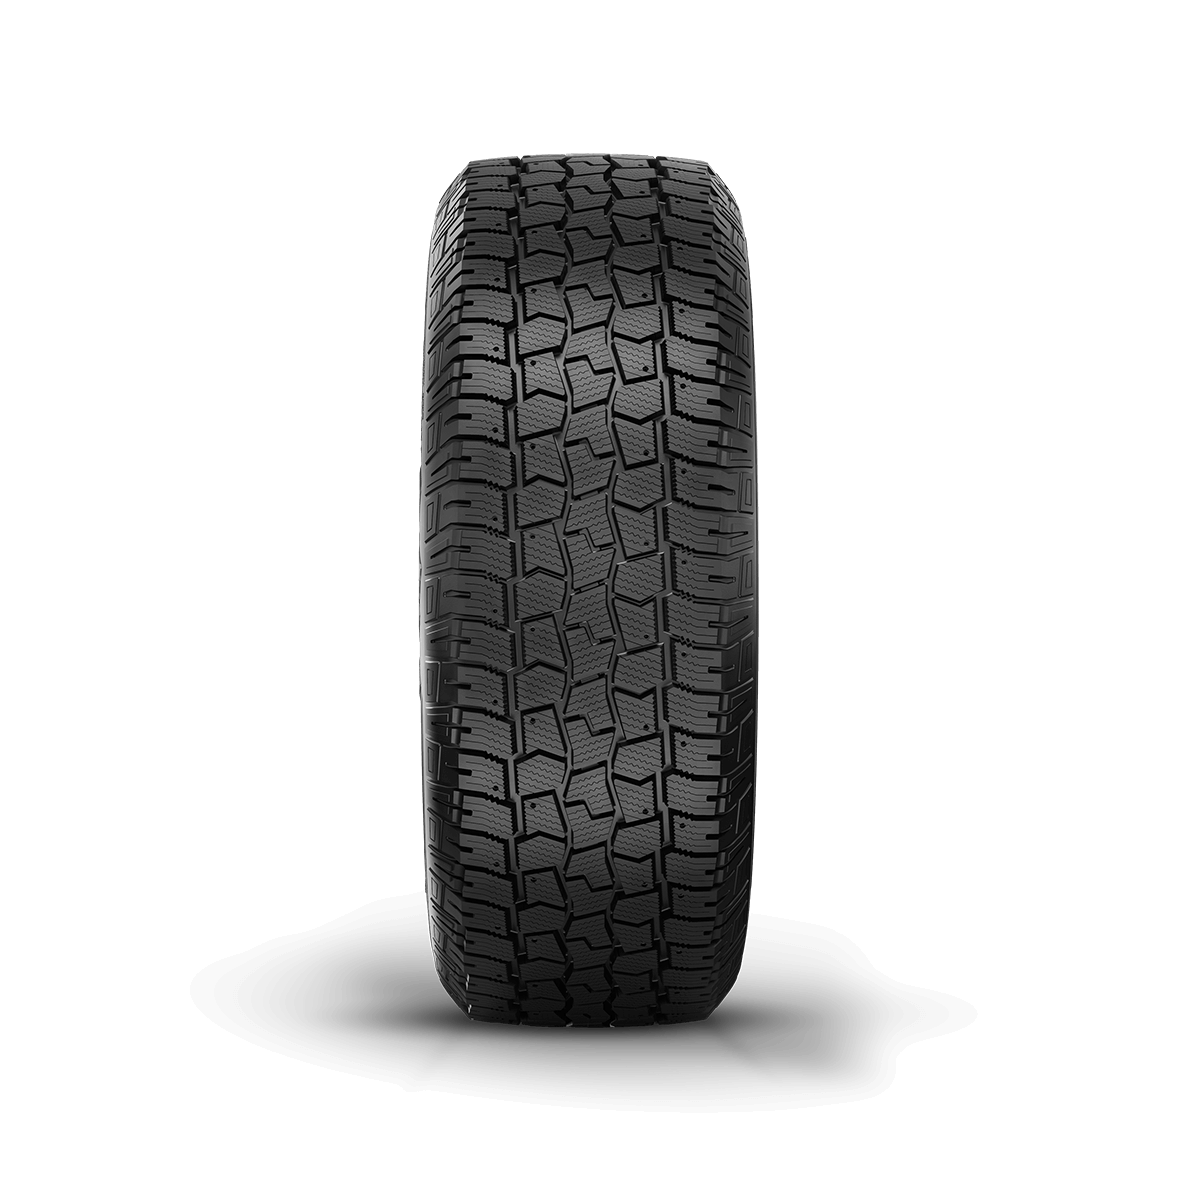 Close up tread view of the Avalanche TT tire on a white background. 